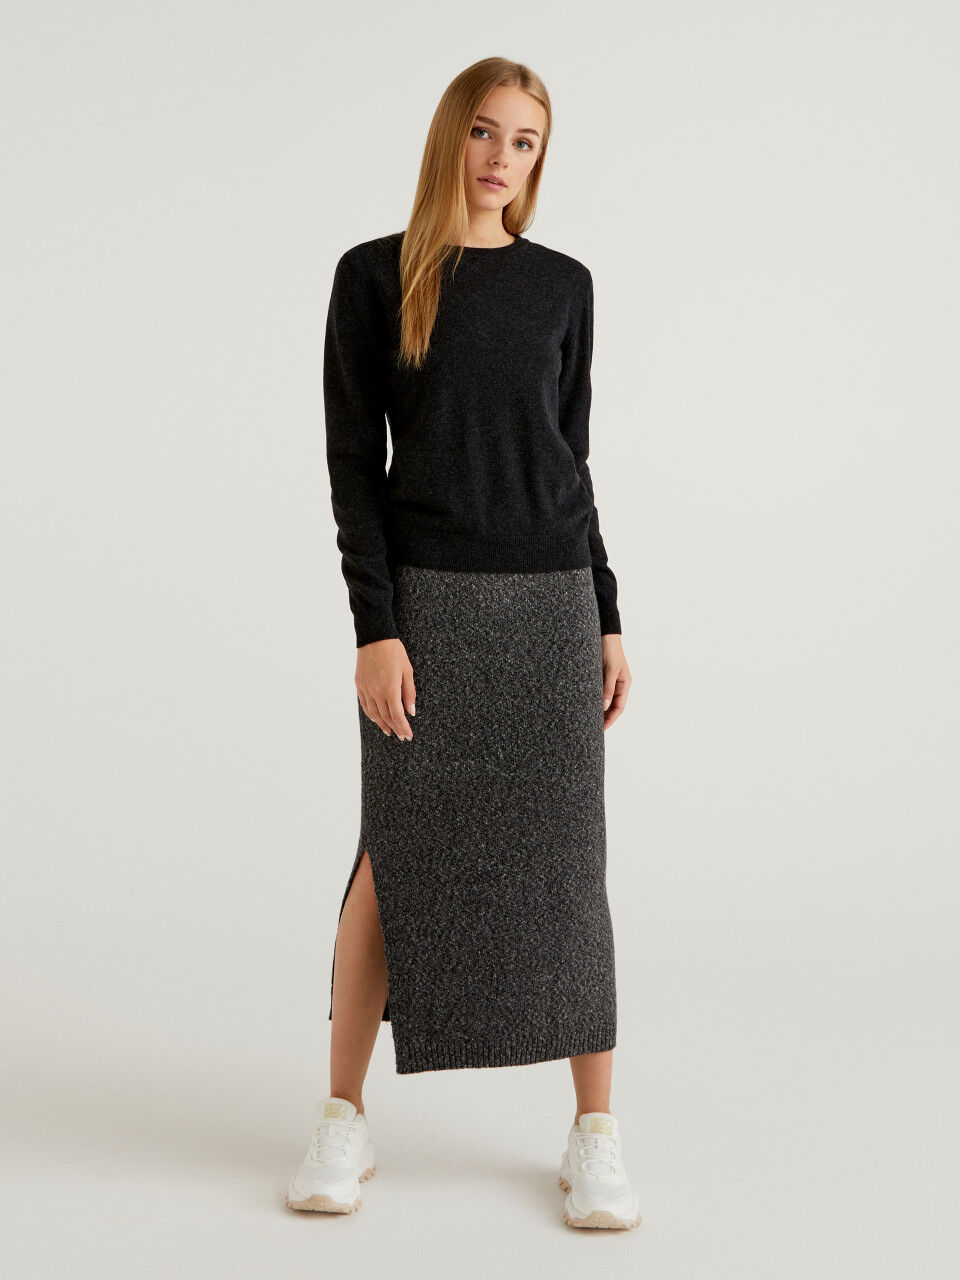 Midi and Pencil Skirt New Collection 2022 | Benetton